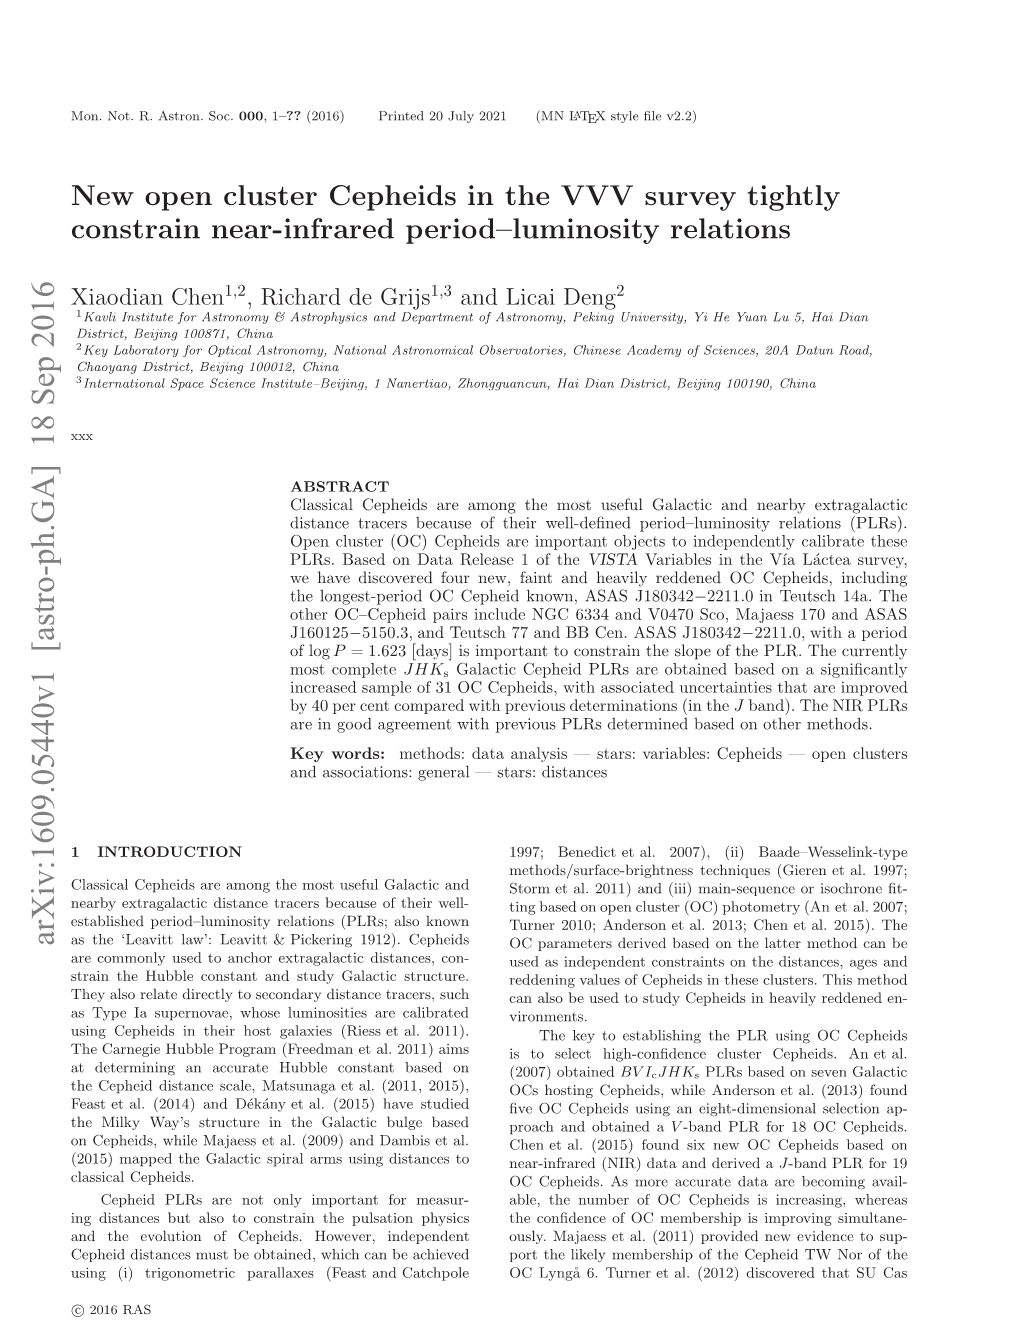 New Open Cluster Cepheids in the VVV Survey Tightly Constrain